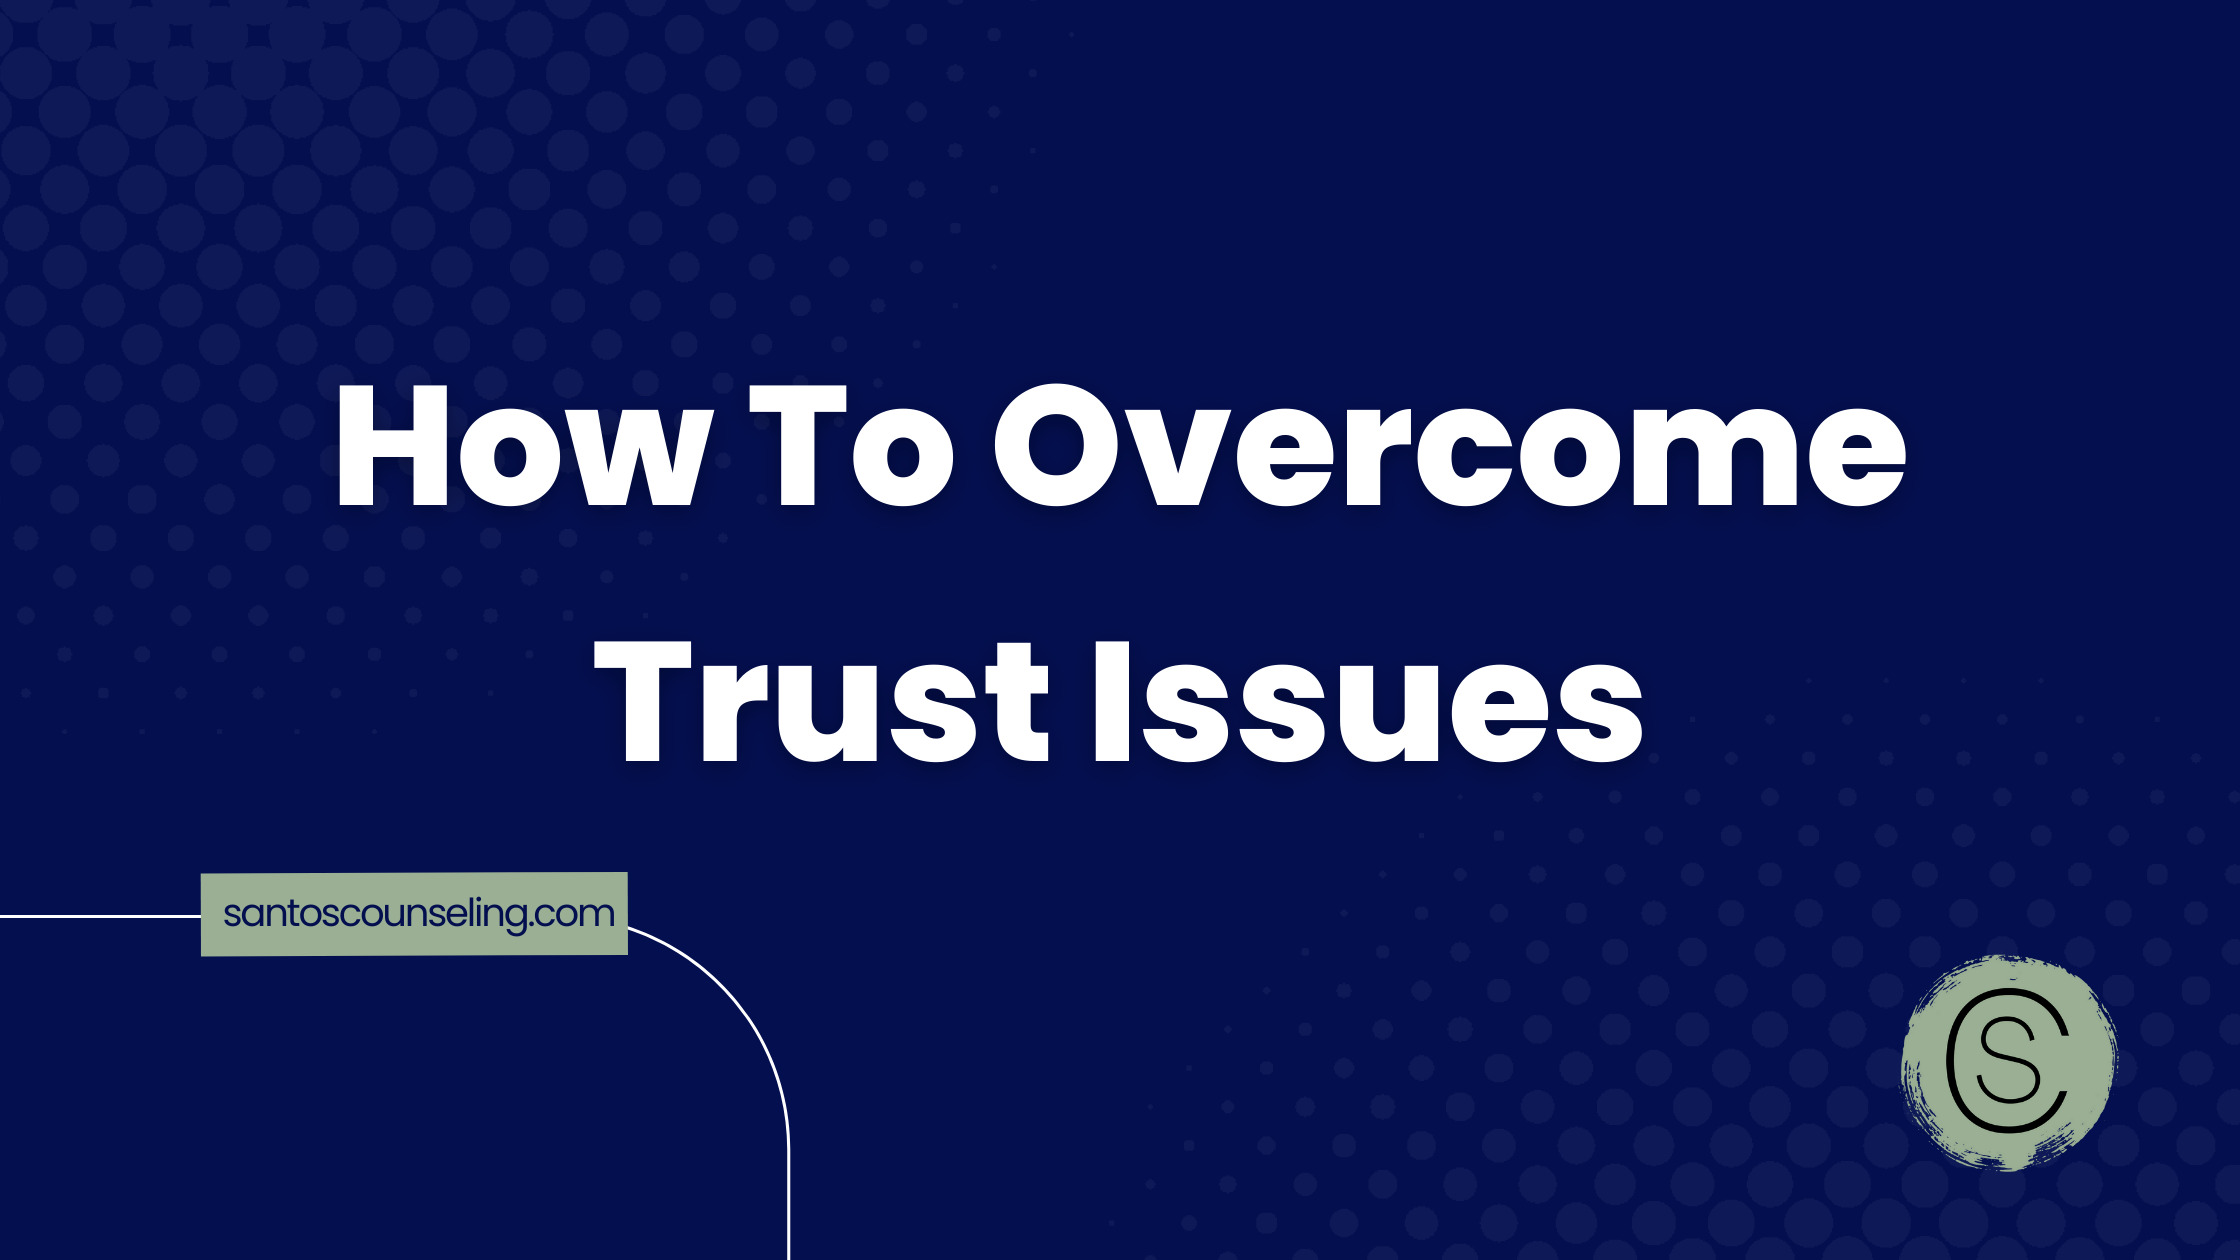 How To Overcome Trust Issues, How To Save A Relationship Without Trust, And How To Trust Someone Again